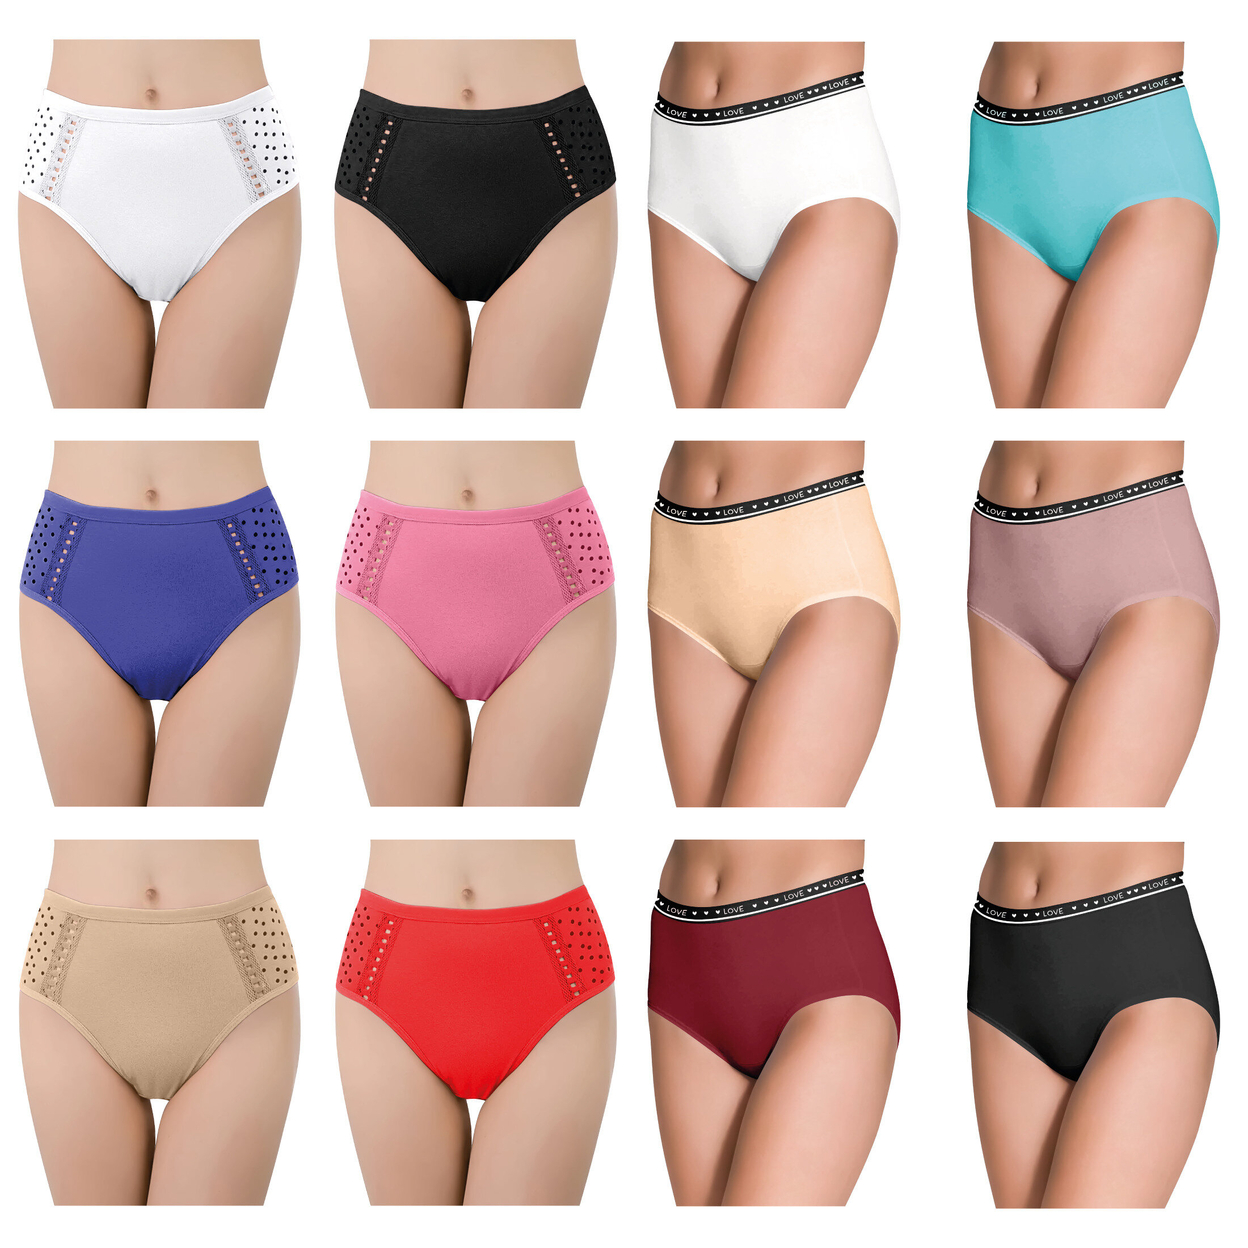 6-Pack: Women's Ultra Soft Moisture Wicking Panties Cotton Perfect Fit Underwear (Plus Sizes Available) - Small